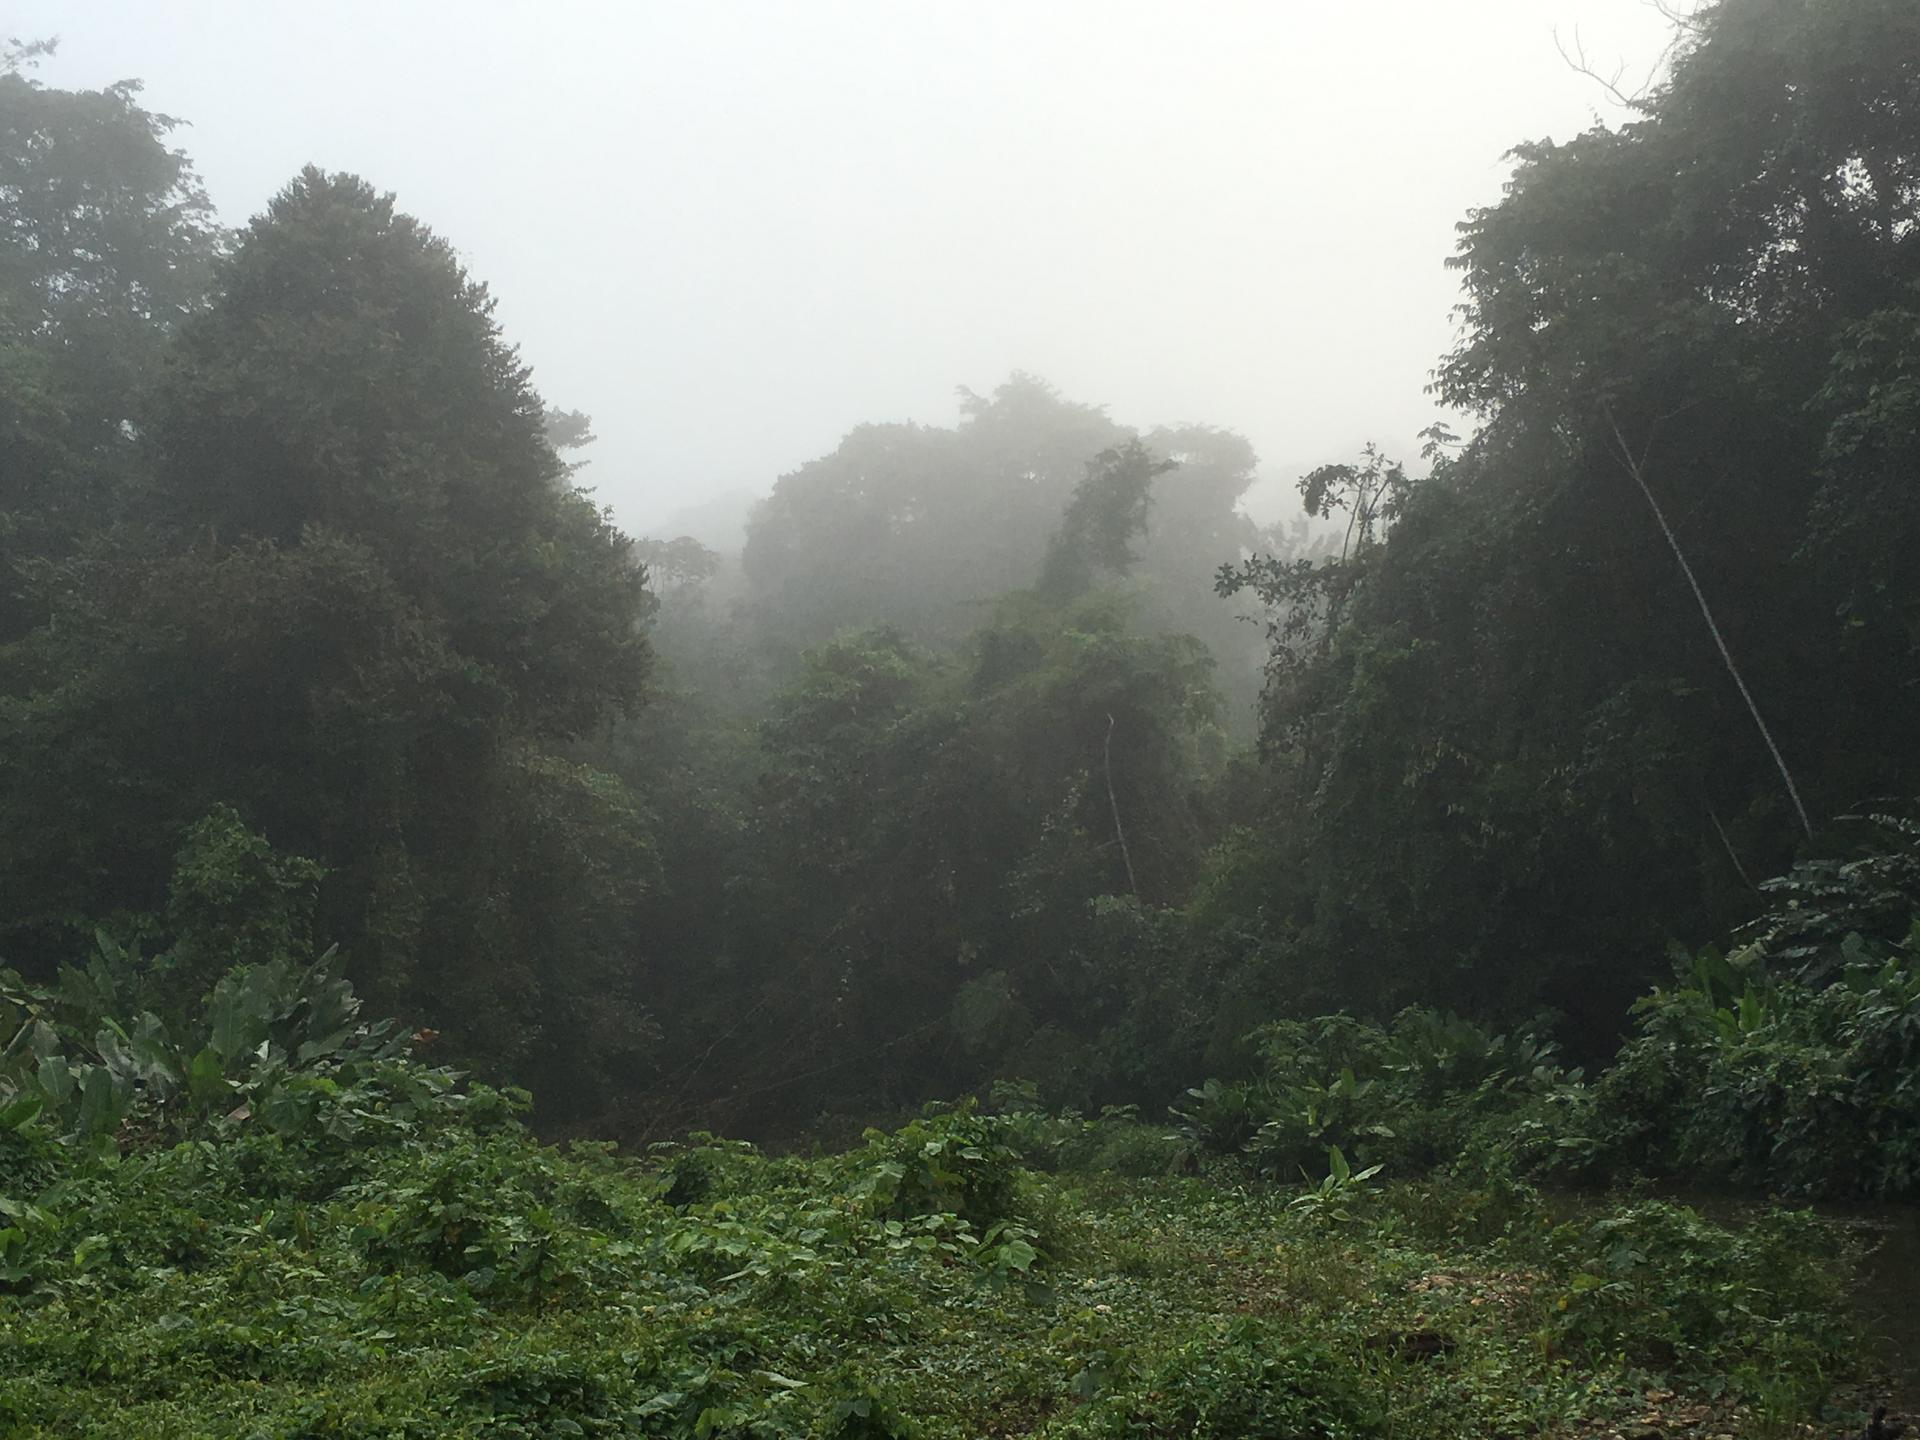 The jungle at dawn, seen from the banks of the unknown river flowing through the valley, 2015.